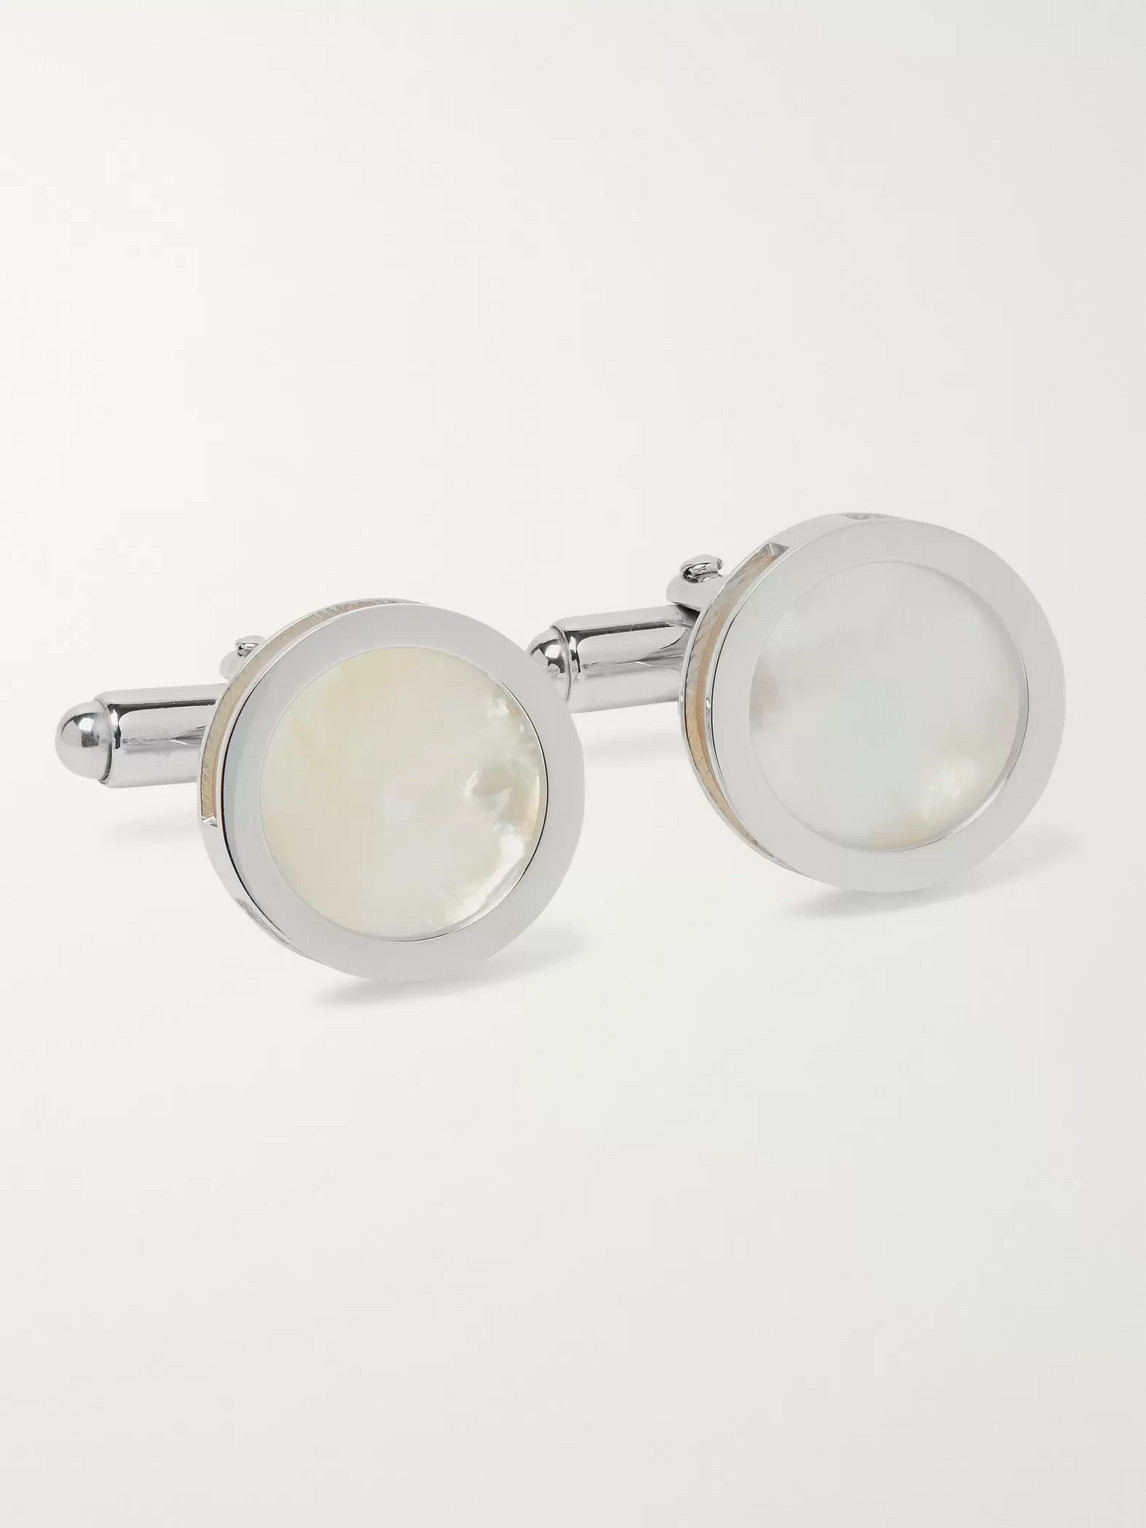 LANVIN ROSE GOLD-PLATED ONYX AND MOTHER-OF-PEARL CUFFLINKS